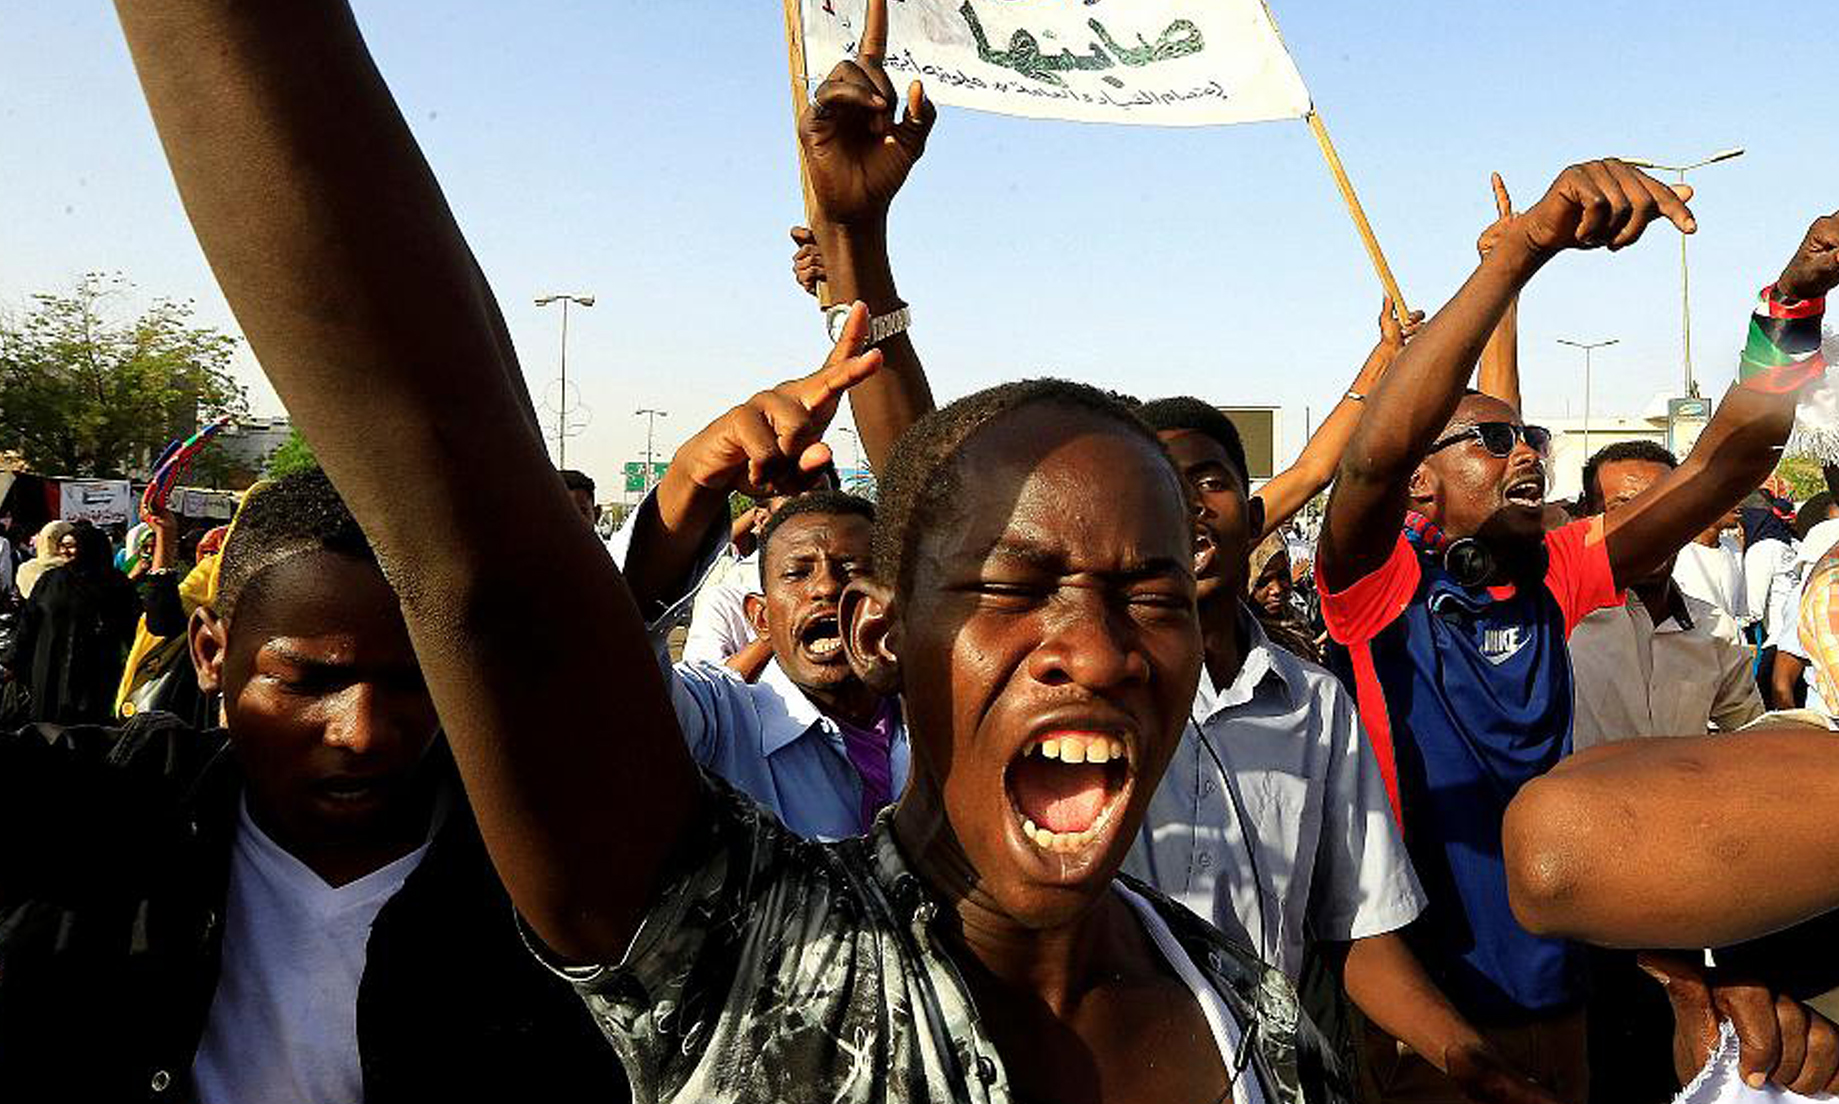 Sudan: Death Toll Rises to 60 in Crackdown on Protests as Military Rulers Seek Deescalation